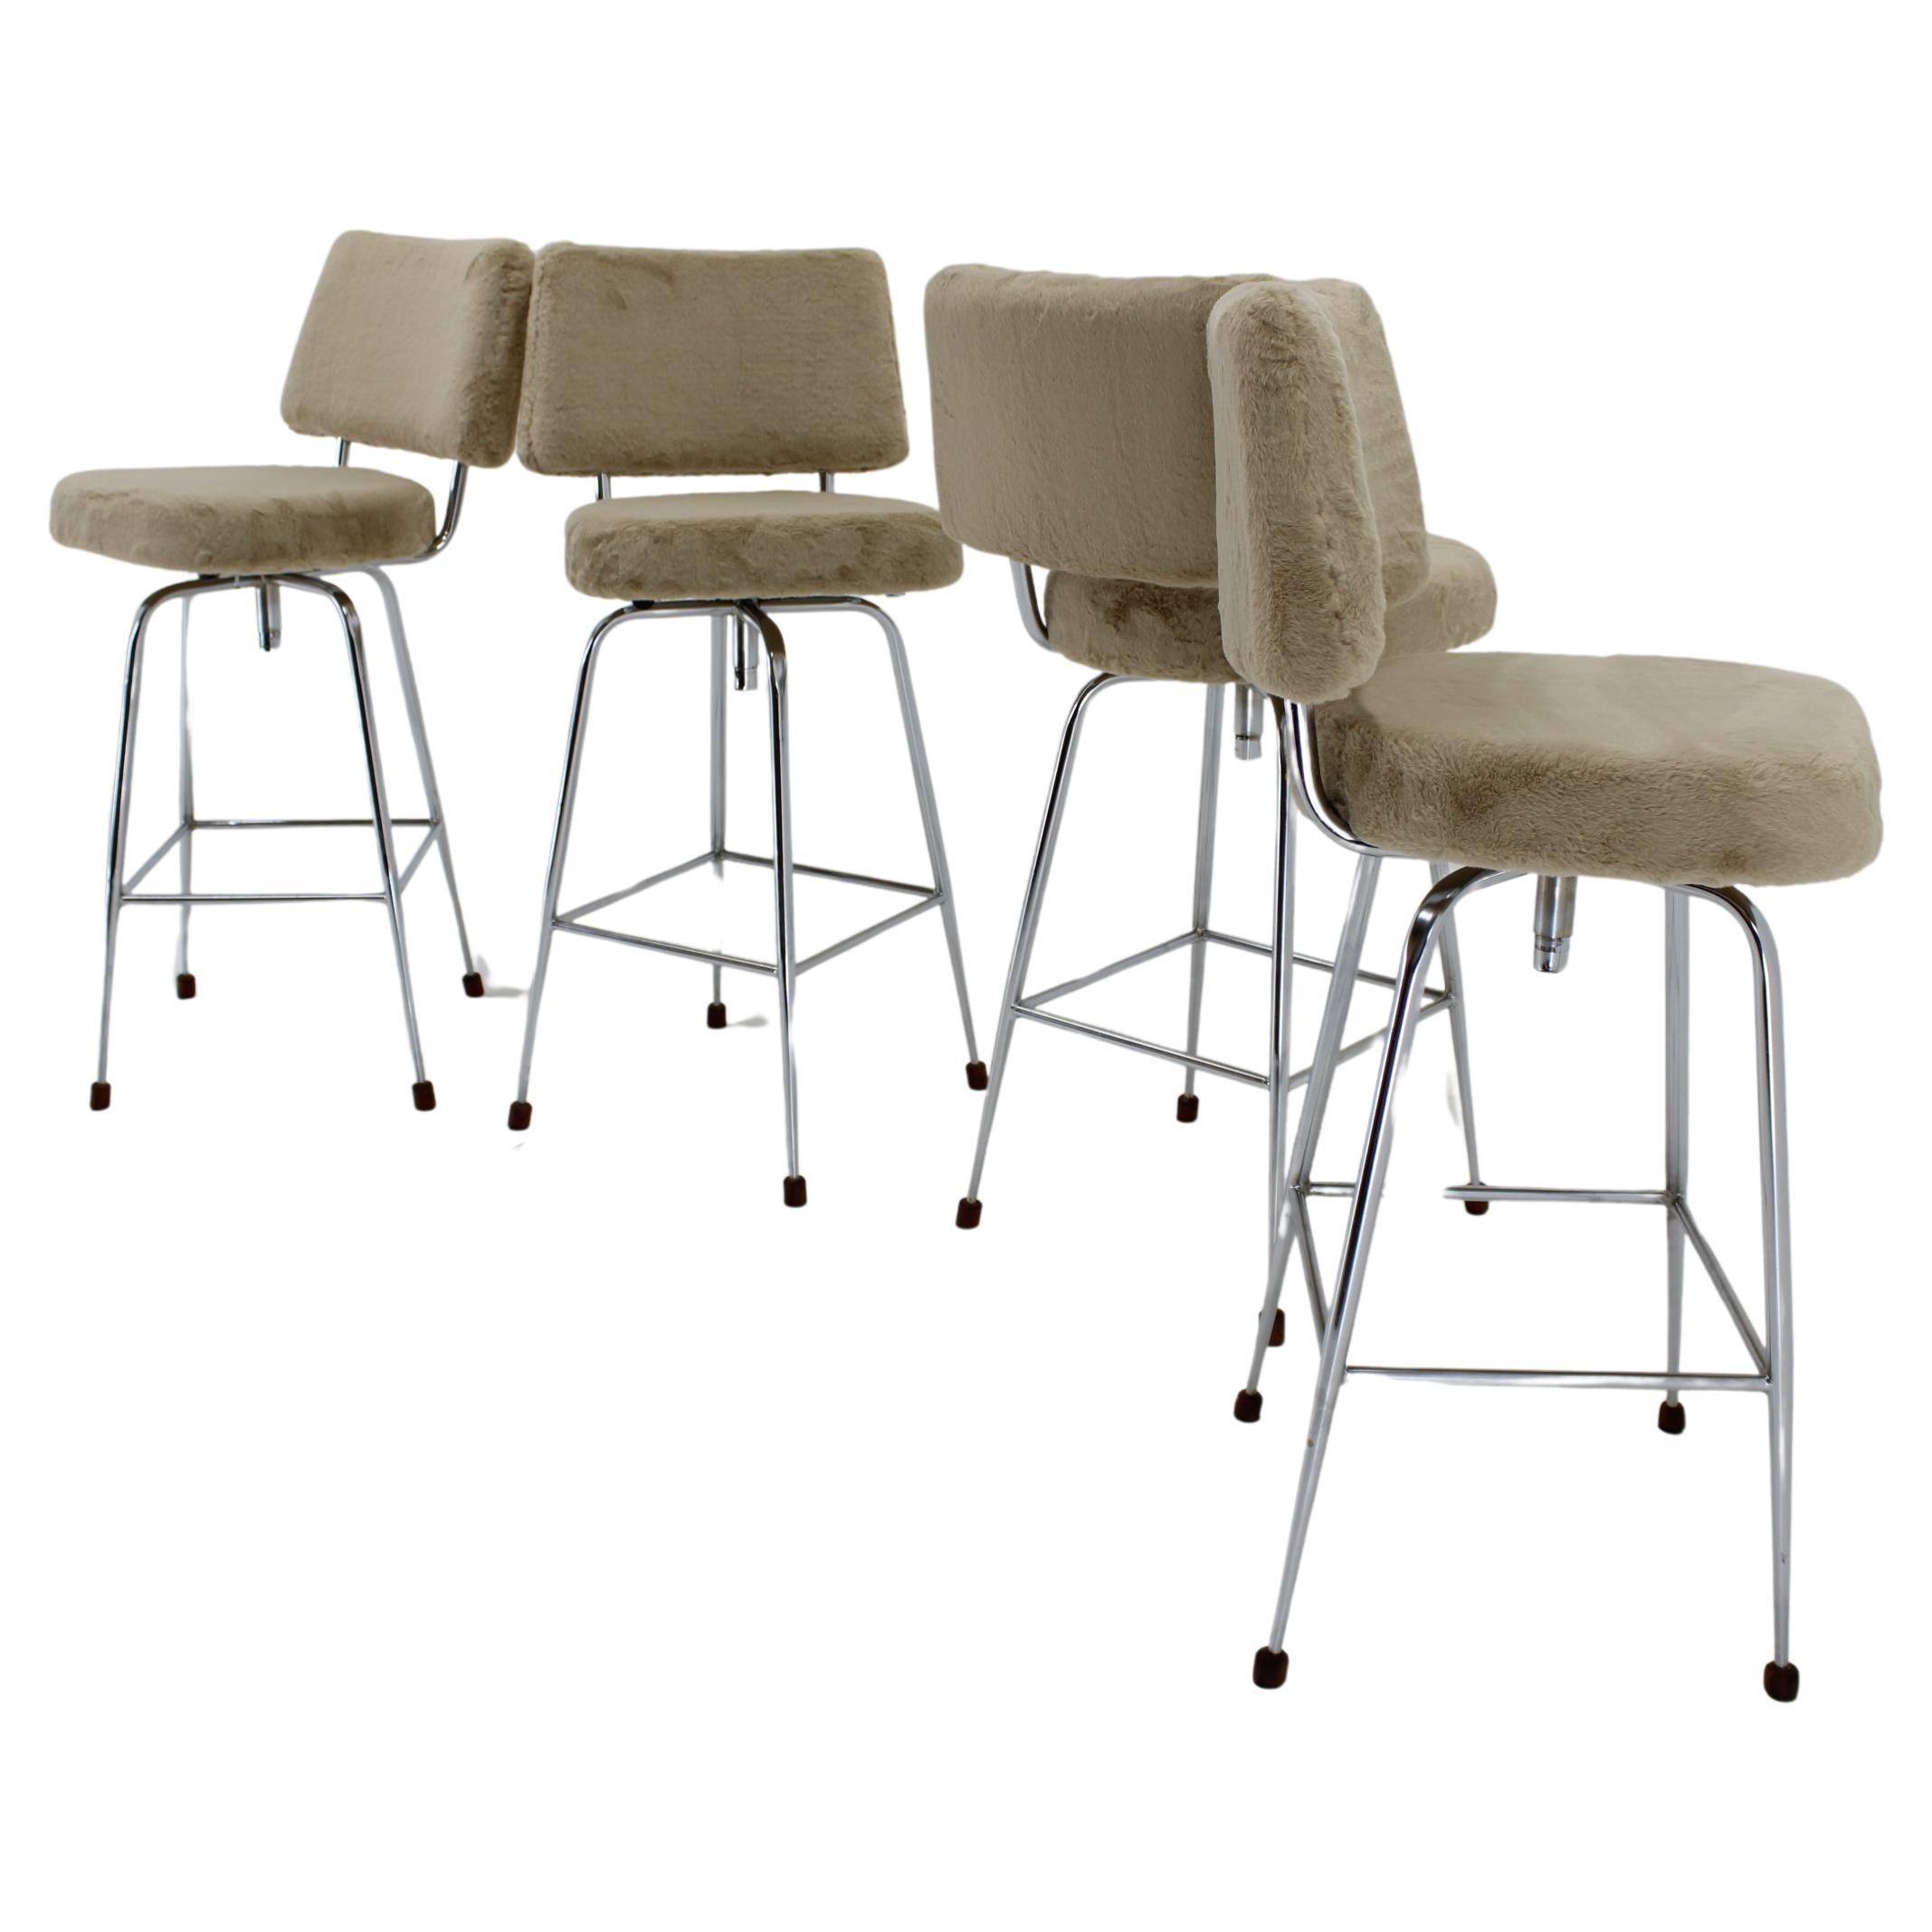 1960s Set of Four Restored Bar Chairs, Czechoslovakia For Sale